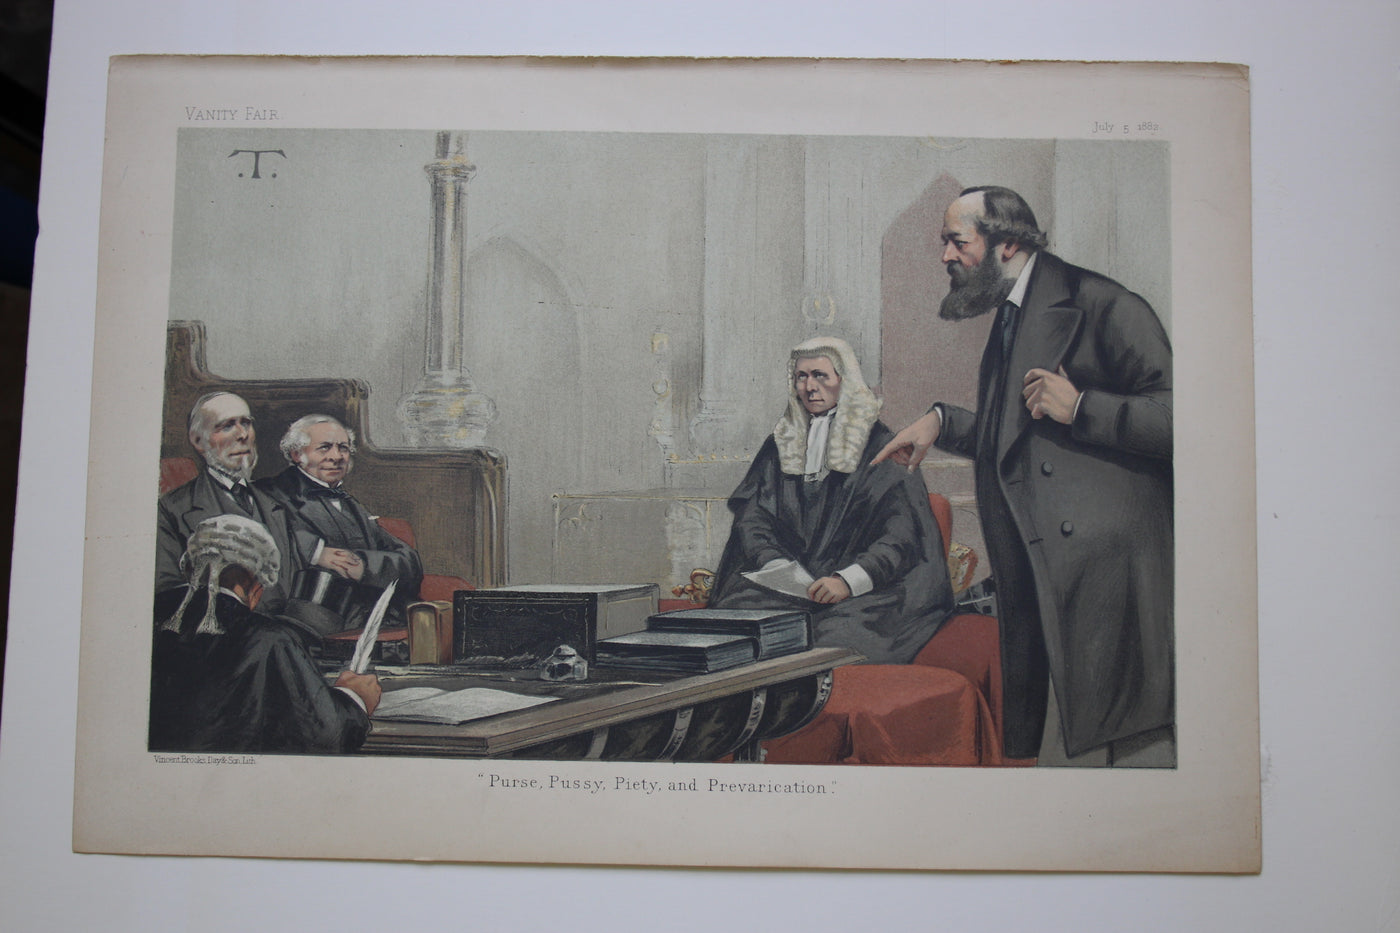 House of Lords Vanity Fair antique print 1878